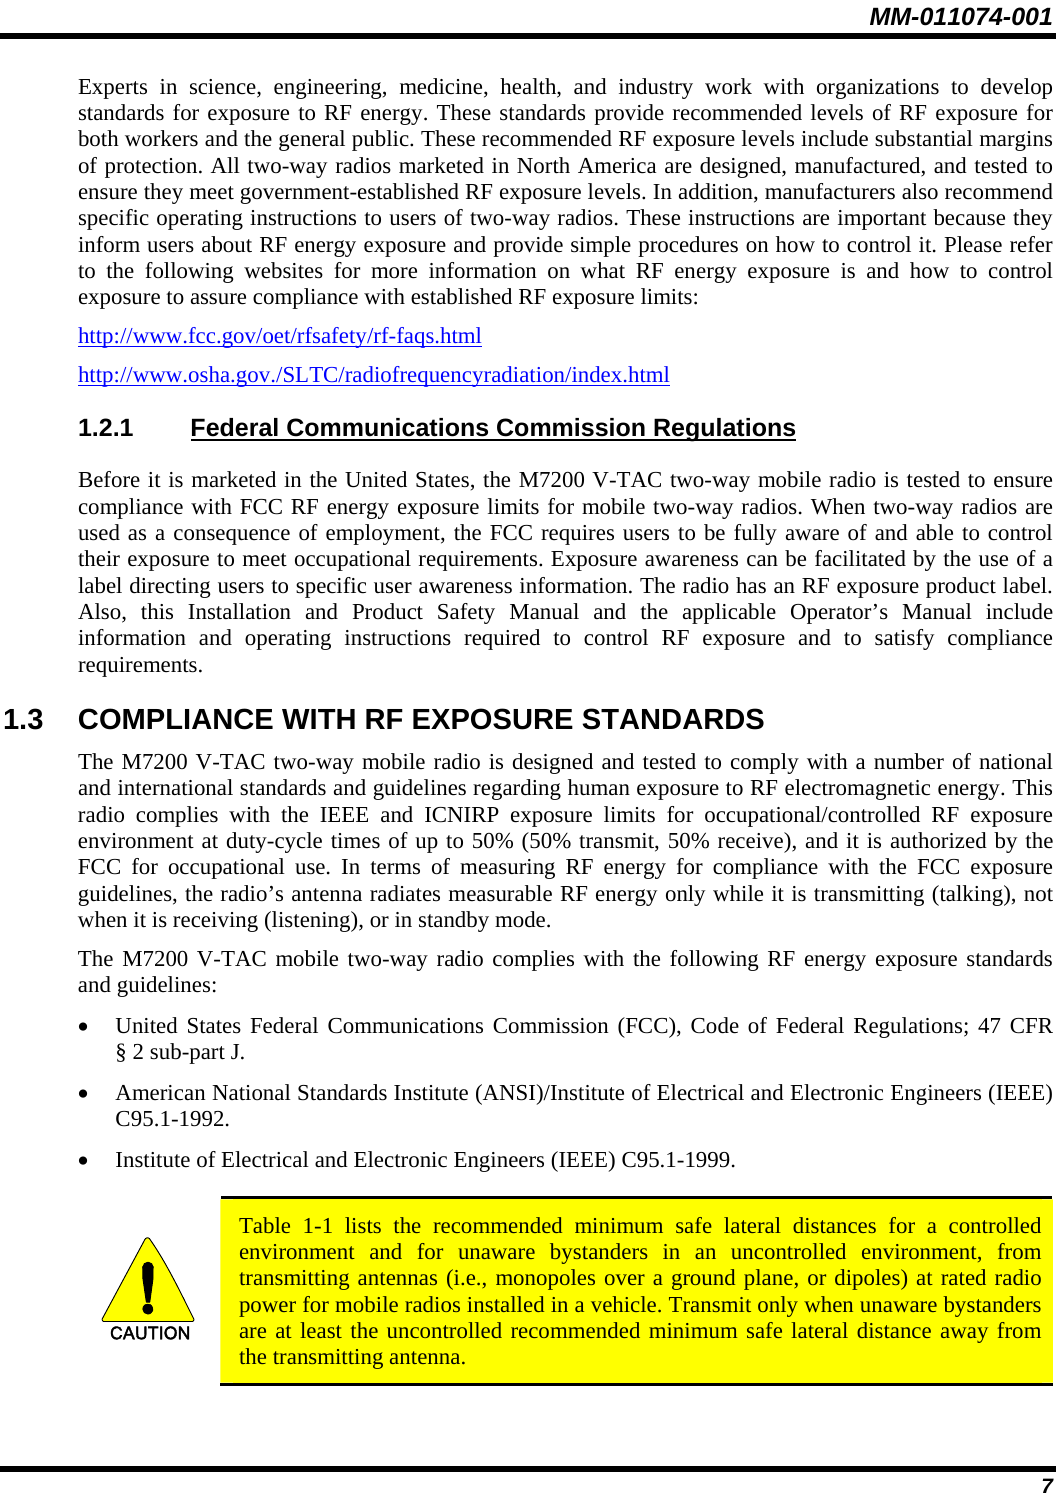 MM-011074-001 7 Experts in science, engineering, medicine, health, and industry work with organizations to develop standards for exposure to RF energy. These standards provide recommended levels of RF exposure for both workers and the general public. These recommended RF exposure levels include substantial margins of protection. All two-way radios marketed in North America are designed, manufactured, and tested to ensure they meet government-established RF exposure levels. In addition, manufacturers also recommend specific operating instructions to users of two-way radios. These instructions are important because they inform users about RF energy exposure and provide simple procedures on how to control it. Please refer to the following websites for more information on what RF energy exposure is and how to control exposure to assure compliance with established RF exposure limits: http://www.fcc.gov/oet/rfsafety/rf-faqs.html http://www.osha.gov./SLTC/radiofrequencyradiation/index.html 1.2.1 Federal Communications Commission Regulations Before it is marketed in the United States, the M7200 V-TAC two-way mobile radio is tested to ensure compliance with FCC RF energy exposure limits for mobile two-way radios. When two-way radios are used as a consequence of employment, the FCC requires users to be fully aware of and able to control their exposure to meet occupational requirements. Exposure awareness can be facilitated by the use of a label directing users to specific user awareness information. The radio has an RF exposure product label. Also, this Installation and Product Safety Manual and the applicable Operator’s Manual include information and operating instructions required to control RF exposure and to satisfy compliance requirements. 1.3  COMPLIANCE WITH RF EXPOSURE STANDARDS The M7200 V-TAC two-way mobile radio is designed and tested to comply with a number of national and international standards and guidelines regarding human exposure to RF electromagnetic energy. This radio complies with the IEEE and ICNIRP exposure limits for occupational/controlled RF exposure environment at duty-cycle times of up to 50% (50% transmit, 50% receive), and it is authorized by the FCC for occupational use. In terms of measuring RF energy for compliance with the FCC exposure guidelines, the radio’s antenna radiates measurable RF energy only while it is transmitting (talking), not when it is receiving (listening), or in standby mode. The M7200 V-TAC mobile two-way radio complies with the following RF energy exposure standards and guidelines: • United States Federal Communications Commission (FCC), Code of Federal Regulations; 47 CFR § 2 sub-part J. • American National Standards Institute (ANSI)/Institute of Electrical and Electronic Engineers (IEEE) C95.1-1992. • Institute of Electrical and Electronic Engineers (IEEE) C95.1-1999.  CAUTION  Table 1-1 lists the recommended minimum safe lateral distances for a controlled environment and for unaware bystanders in an uncontrolled environment, from transmitting antennas (i.e., monopoles over a ground plane, or dipoles) at rated radio power for mobile radios installed in a vehicle. Transmit only when unaware bystanders are at least the uncontrolled recommended minimum safe lateral distance away from the transmitting antenna.  